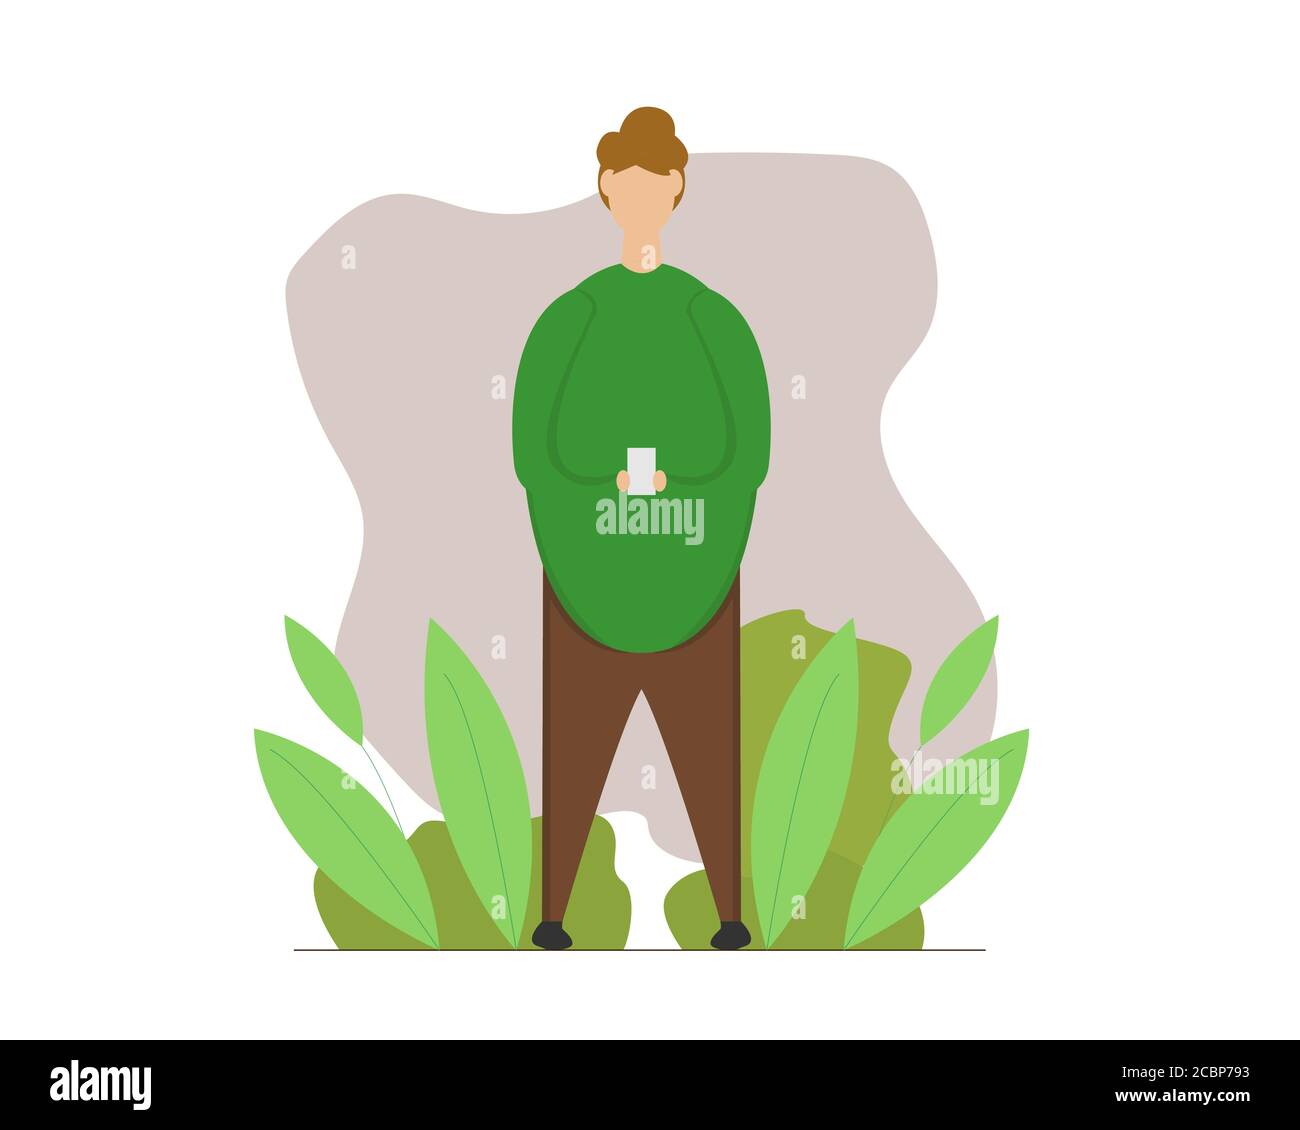 Illustration vector design of a man standing and holding his smartphone Stock Vector